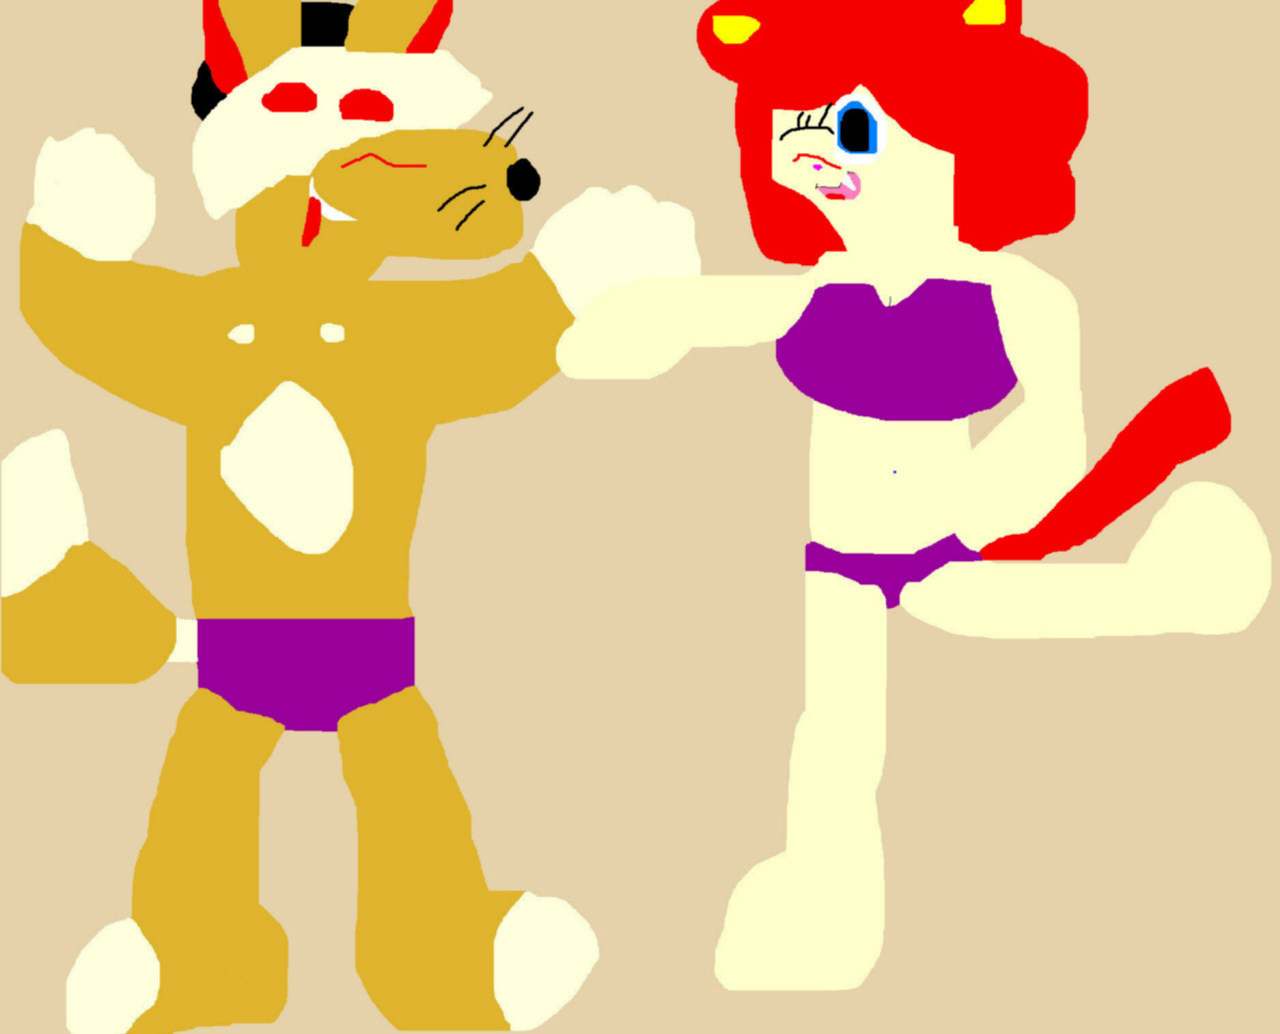 Big Cheese And Polly Acting Silly For Each Other On The Beach Ms Paint by Falconlobo